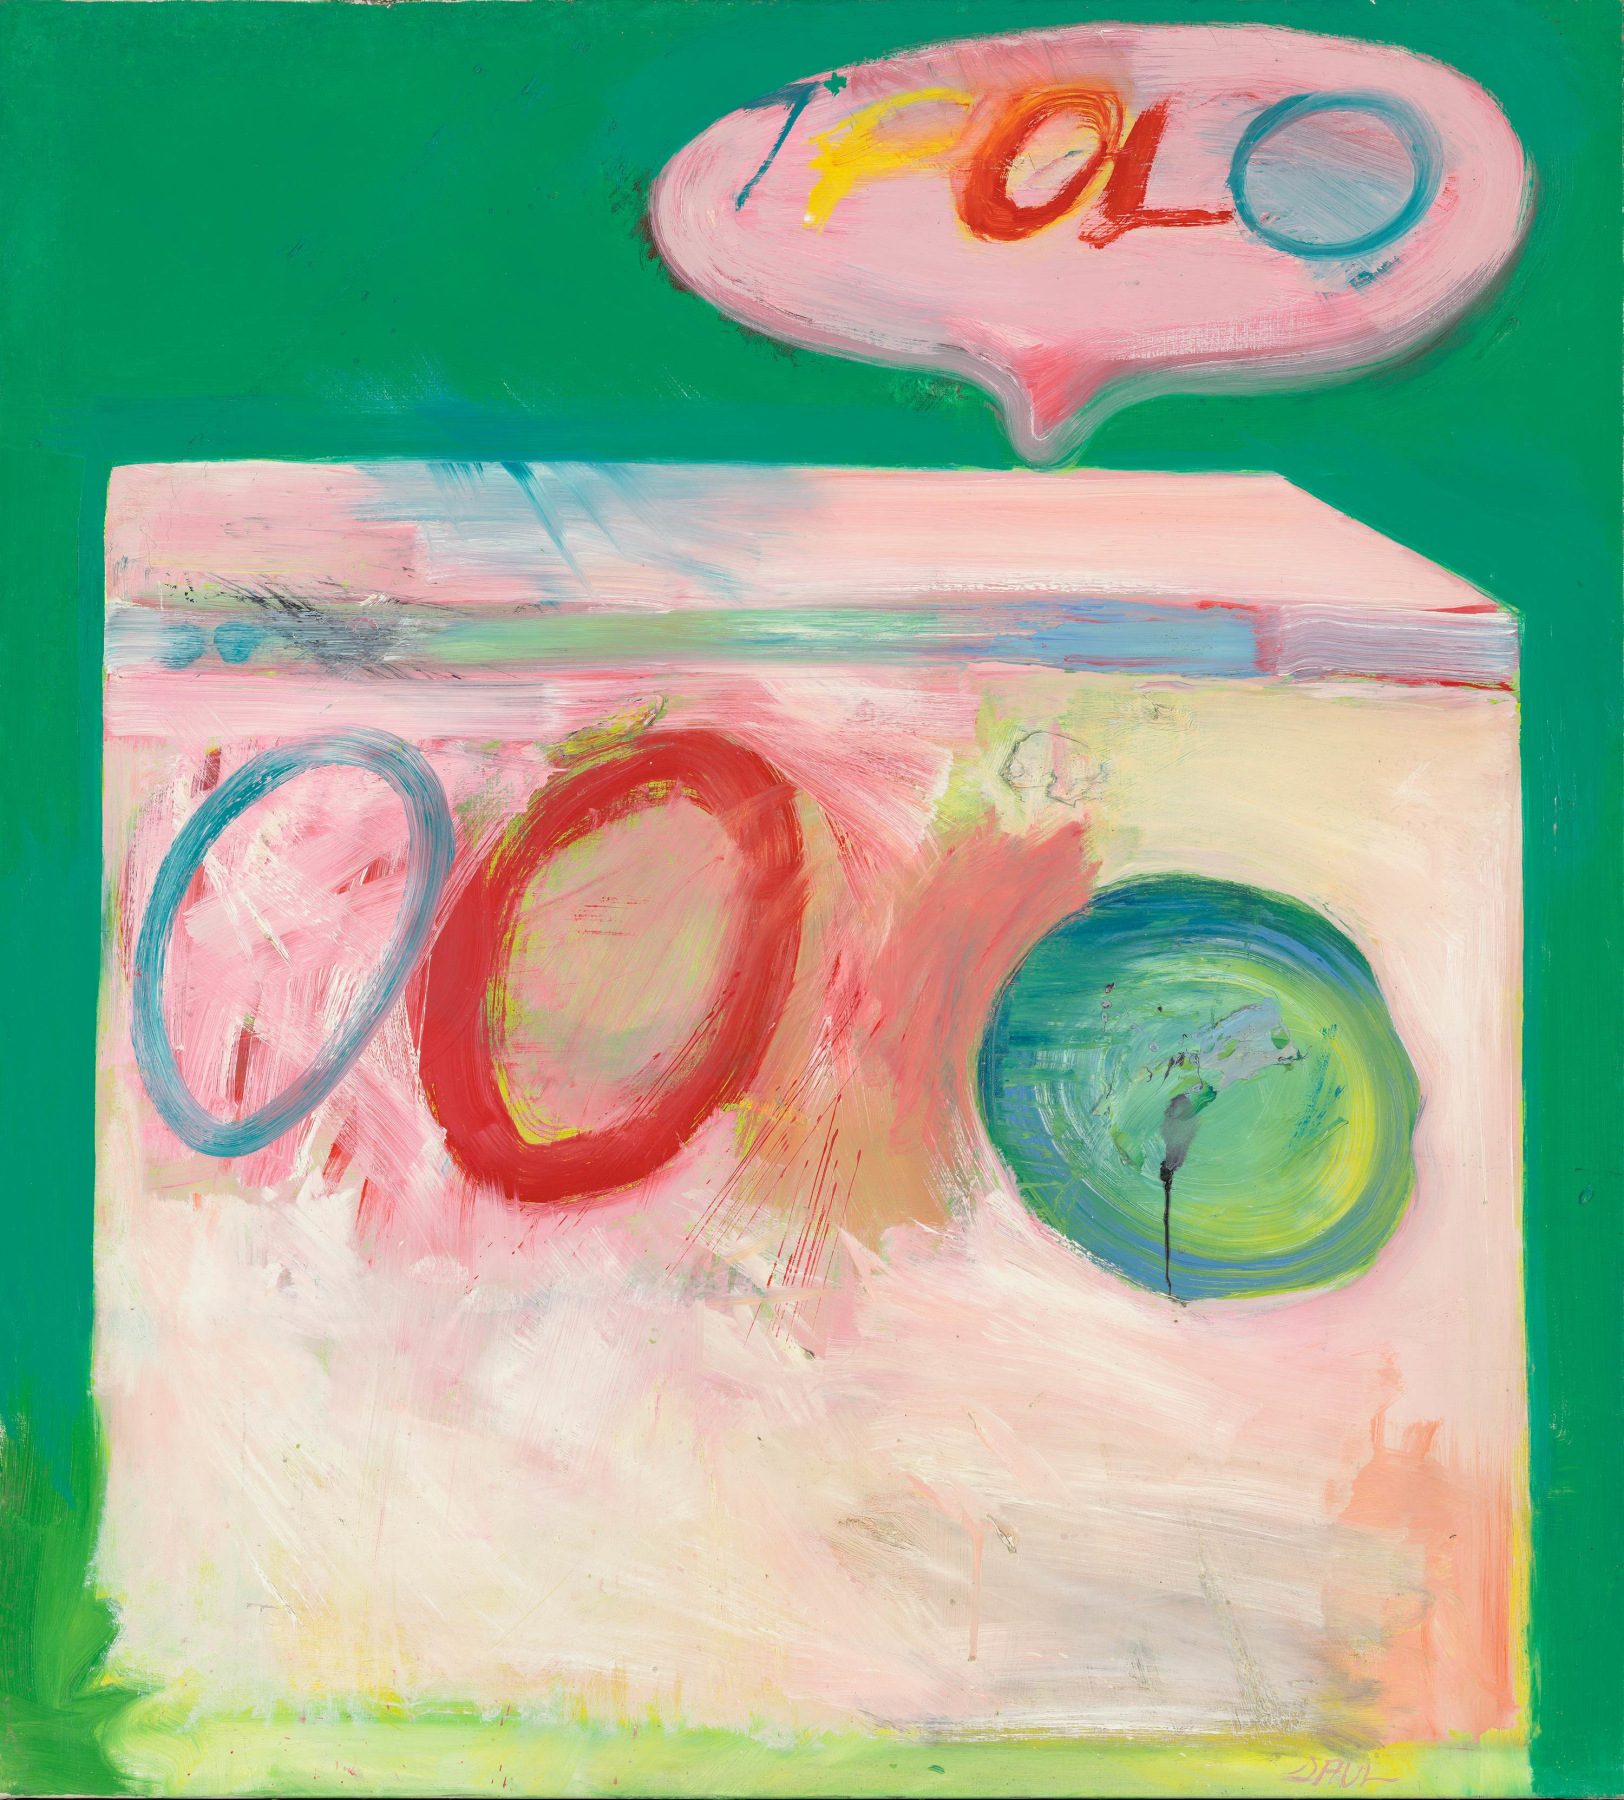 &quot;Untitled&quot;, 1959 Oil on canvas